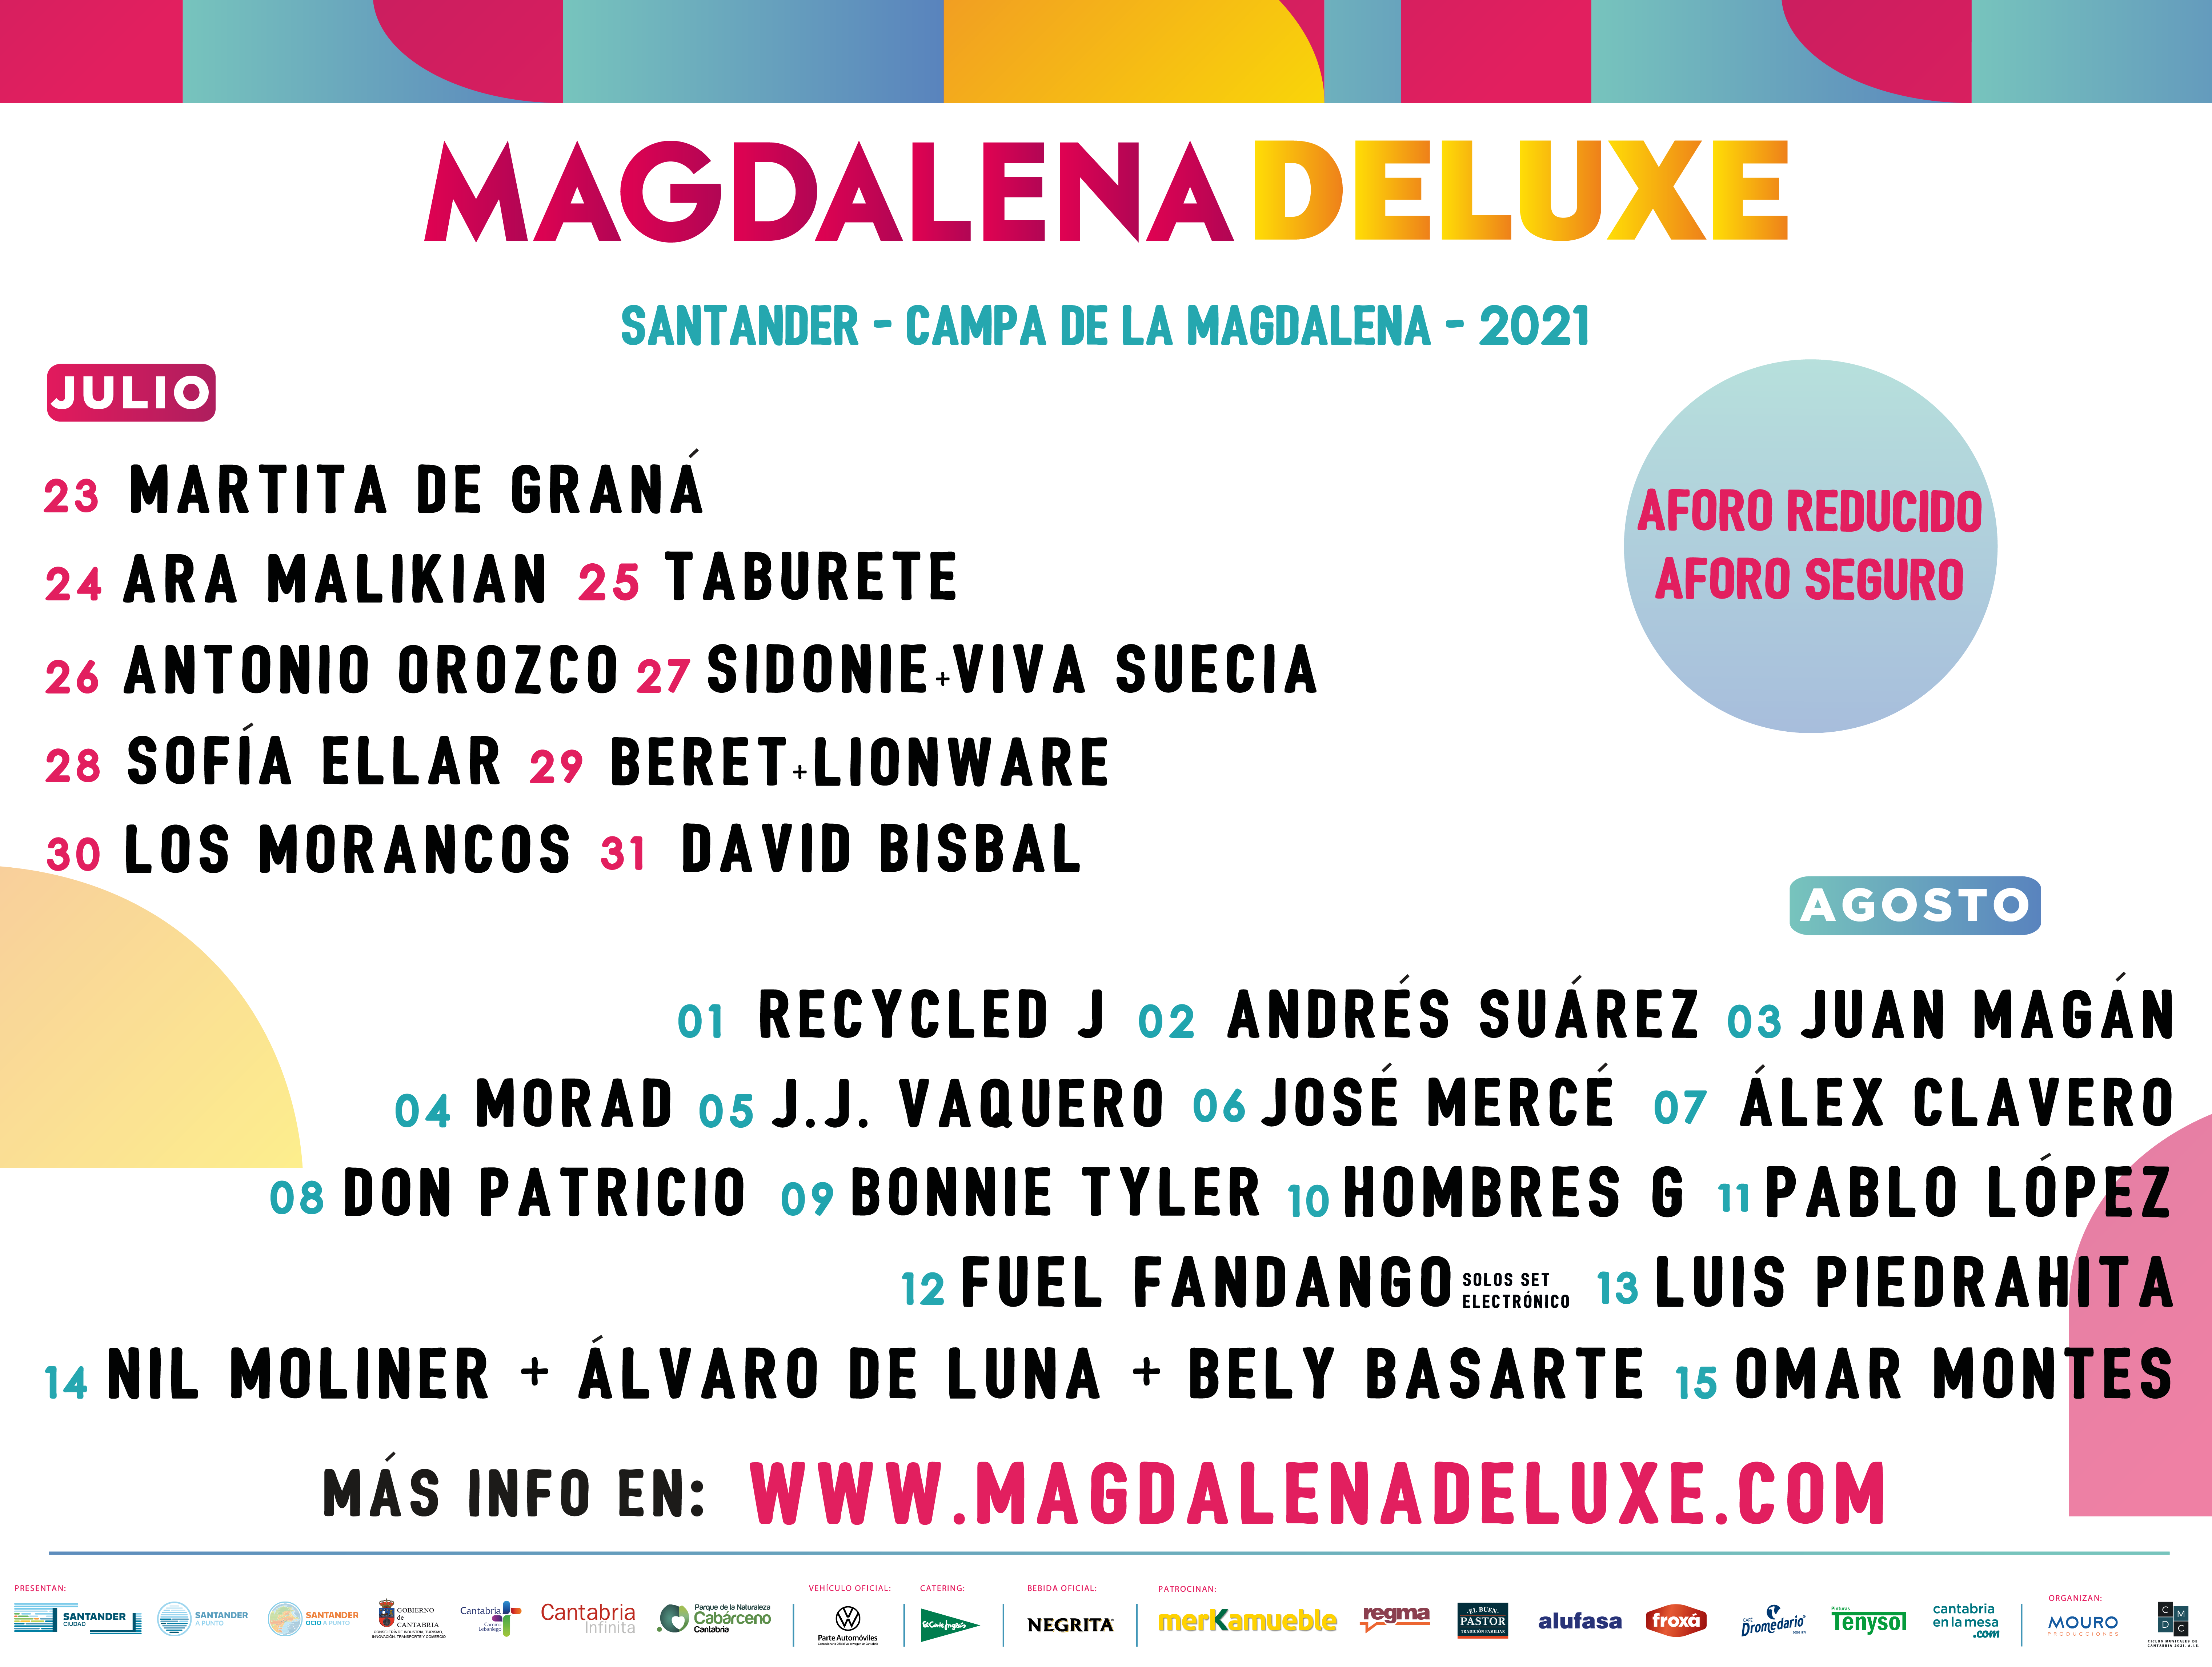 jose-merce-magdalena-deluxe-6-agosto-60d9aa7b74bf03.11556094.png